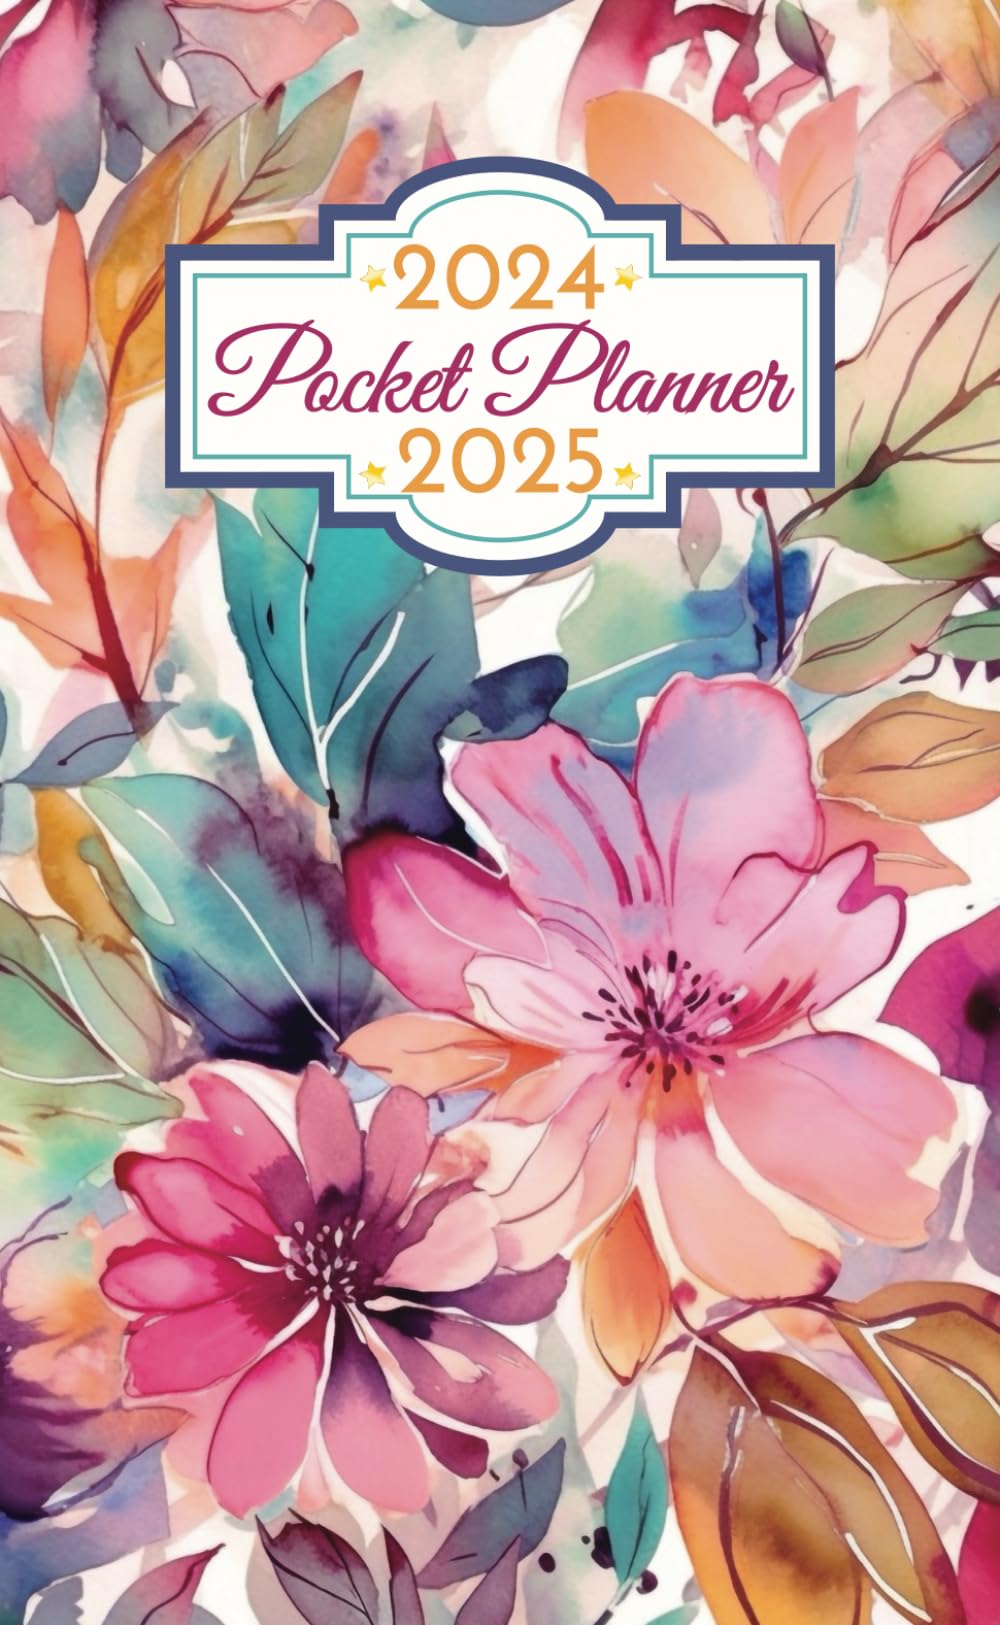 2024-2025 Pocket Planner: Small 2 Year Pocket Calendar Monthly Agenda For Purse, from January 2024 to December 2025, Floral Cover size 4 x 6.5 Size